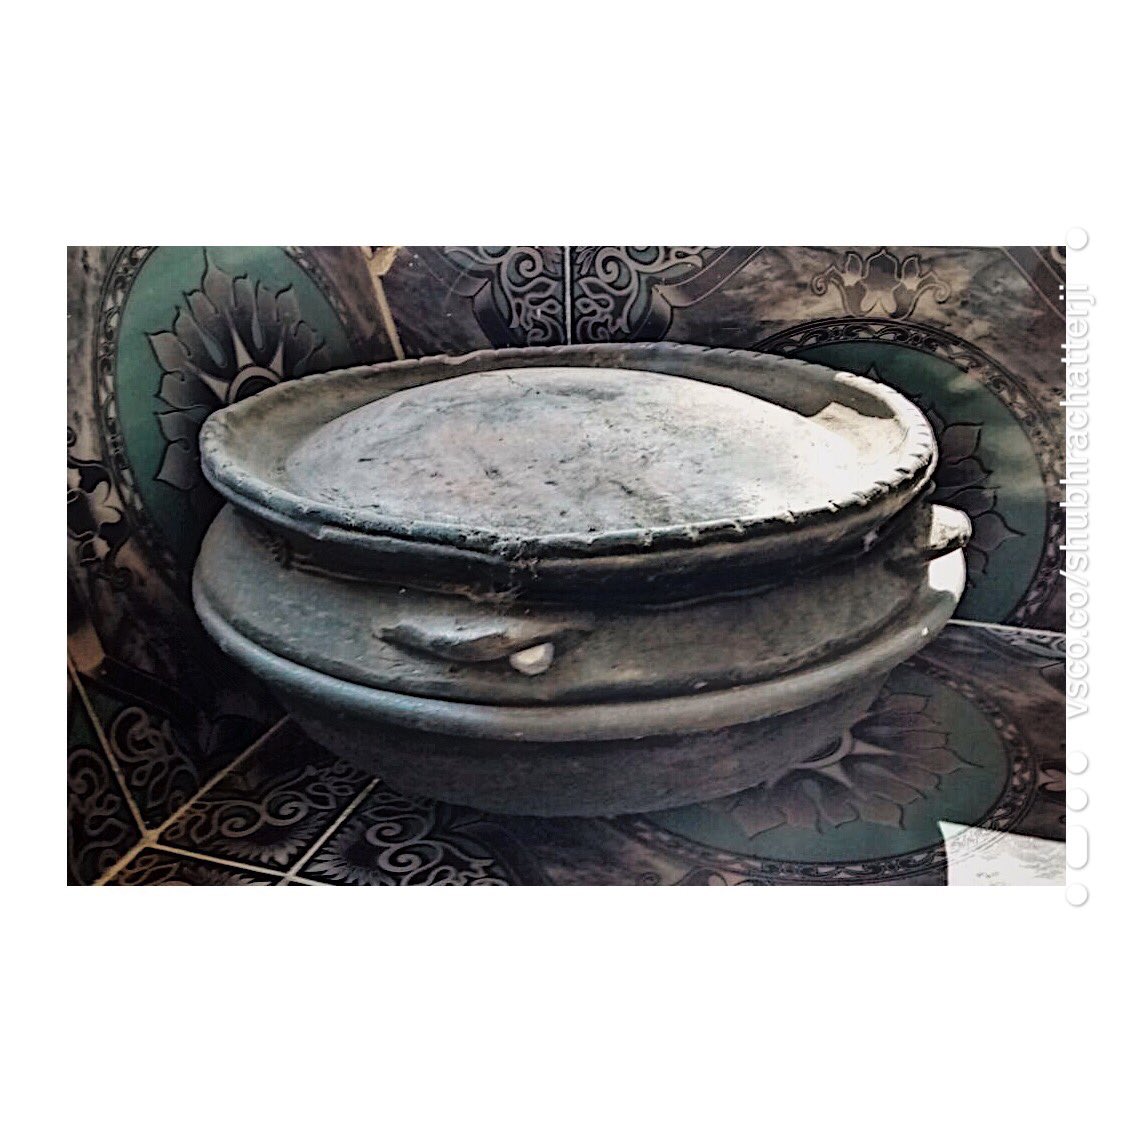 Old-school traditional desi oven from two different kitchens - one in Bombay, and the other in Goa. A fire used to be lit below, and hot coal embers placed on the lid which has raised edges to hold the embers in. Beautiful! I’ve had a prawn pie baked in one of these & it was .